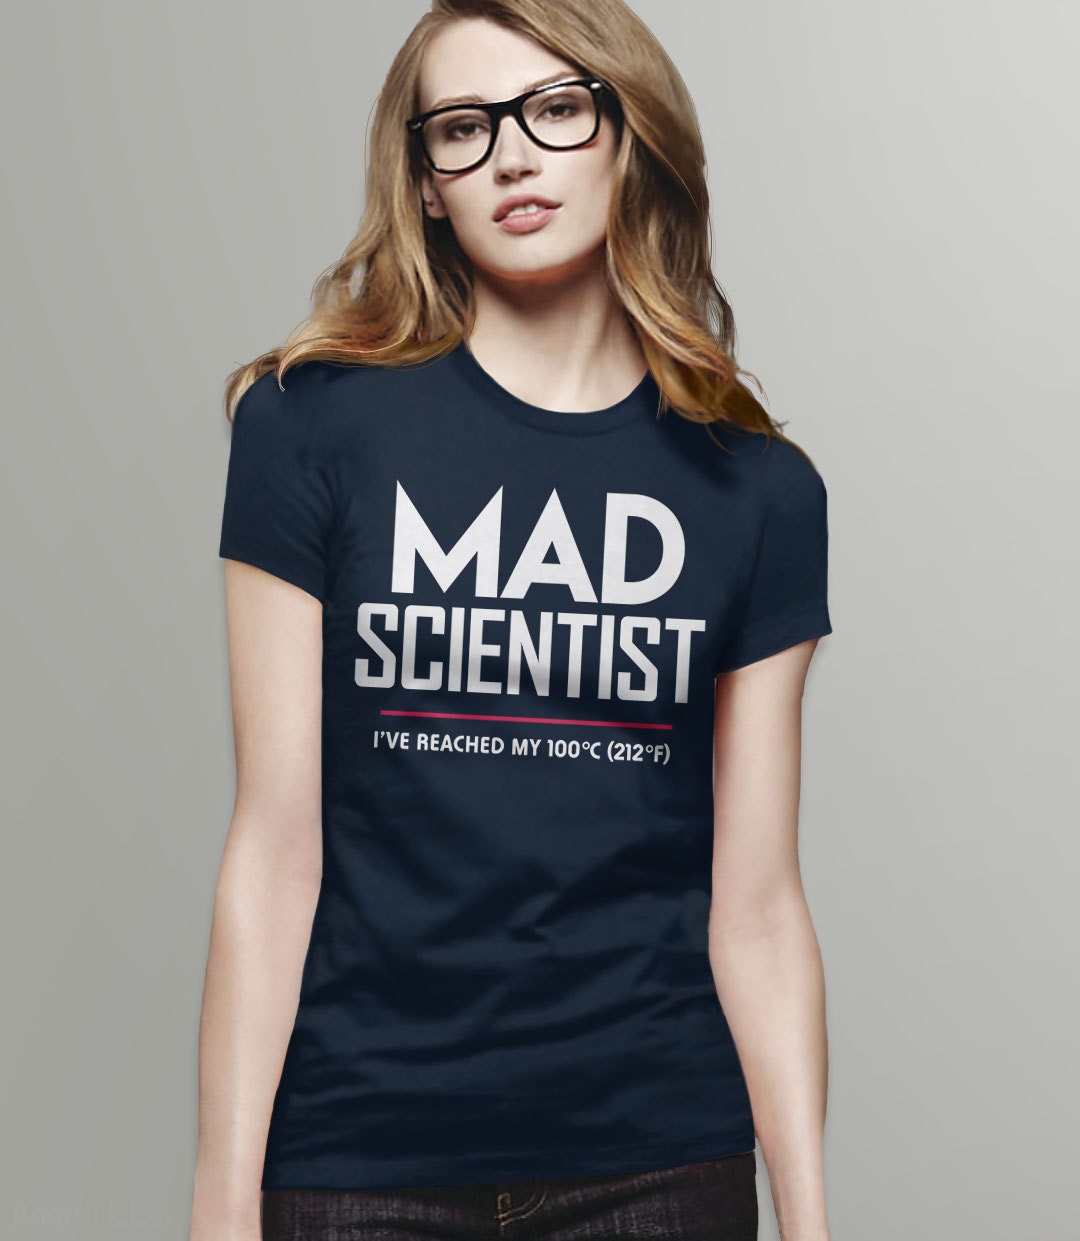 Mad Scientist Shirt, Pro Science Shirt, Funny Science T Shirt, Science ...